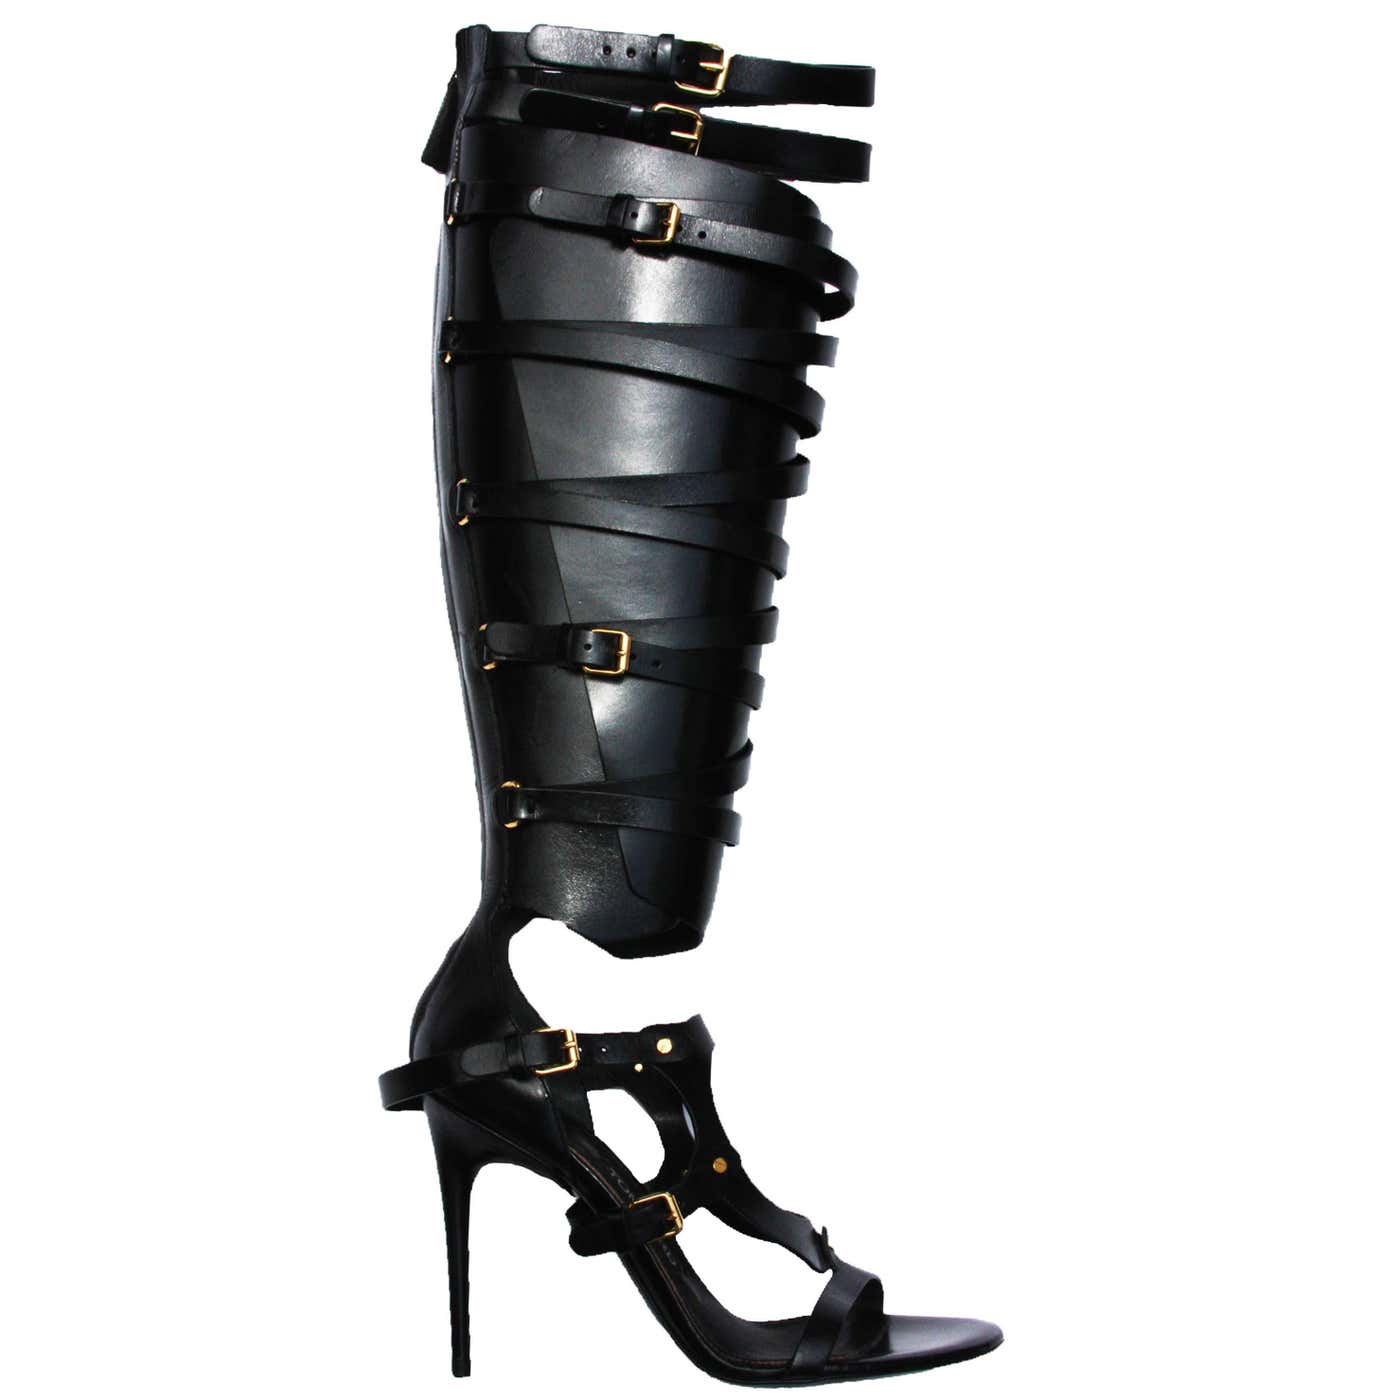 New TOM FORD Black Strappy Buckled Sandal Leather Gladiator Boots at ...